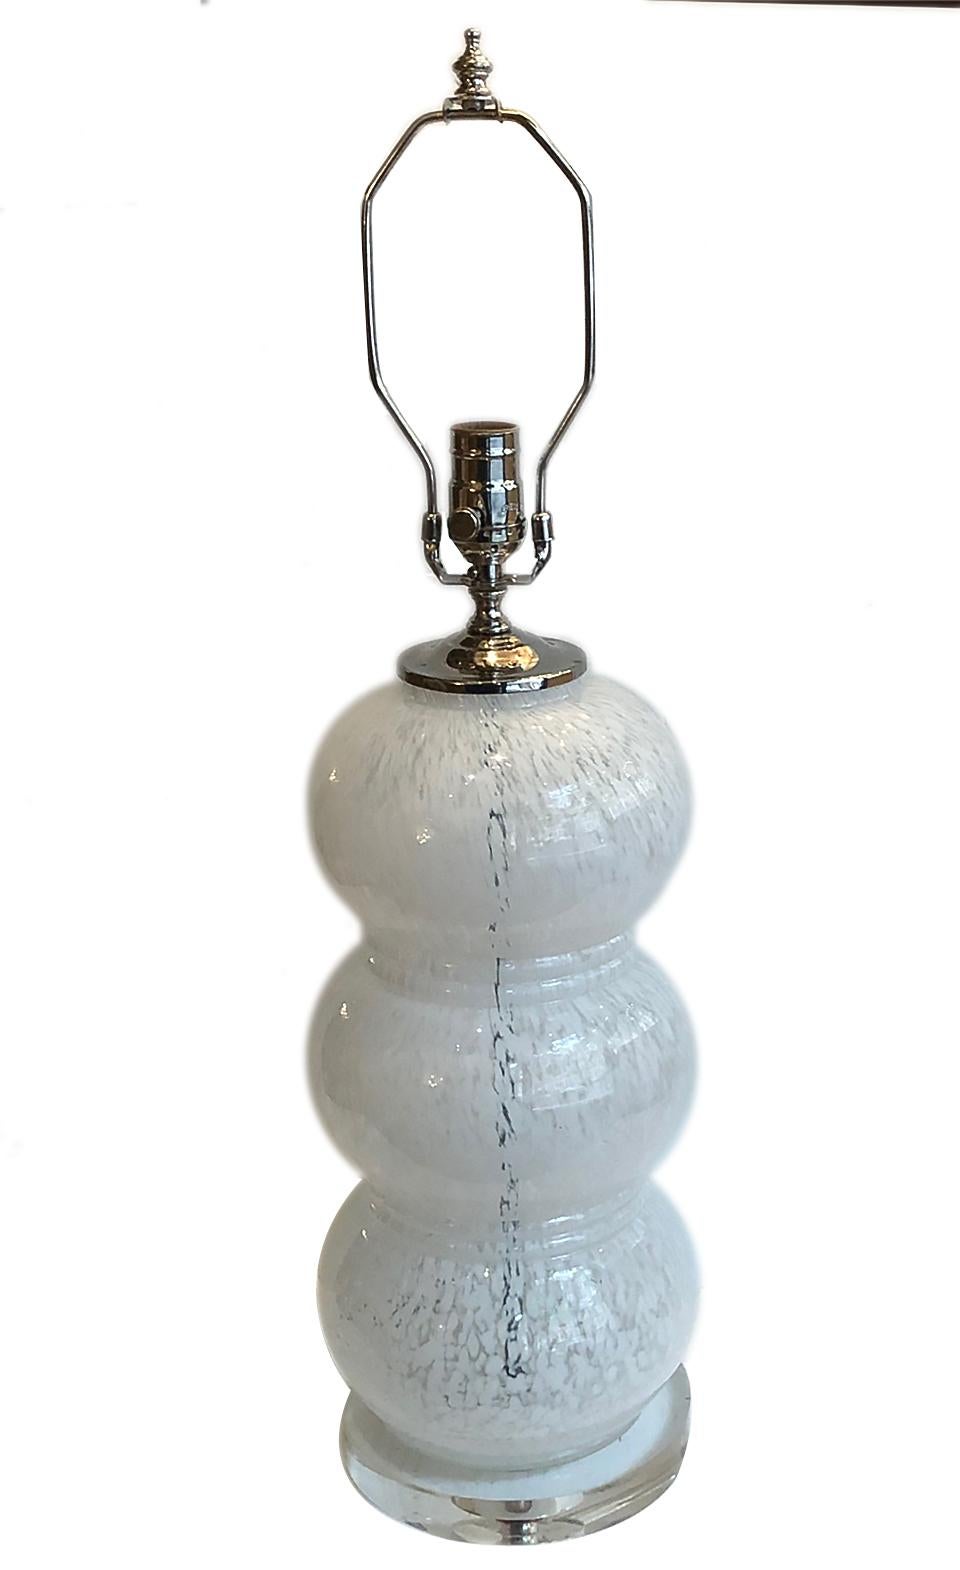 A single circa 1960s Italian blown glass table lamp with Lucite base.

Measurements:
Height of body 17.5